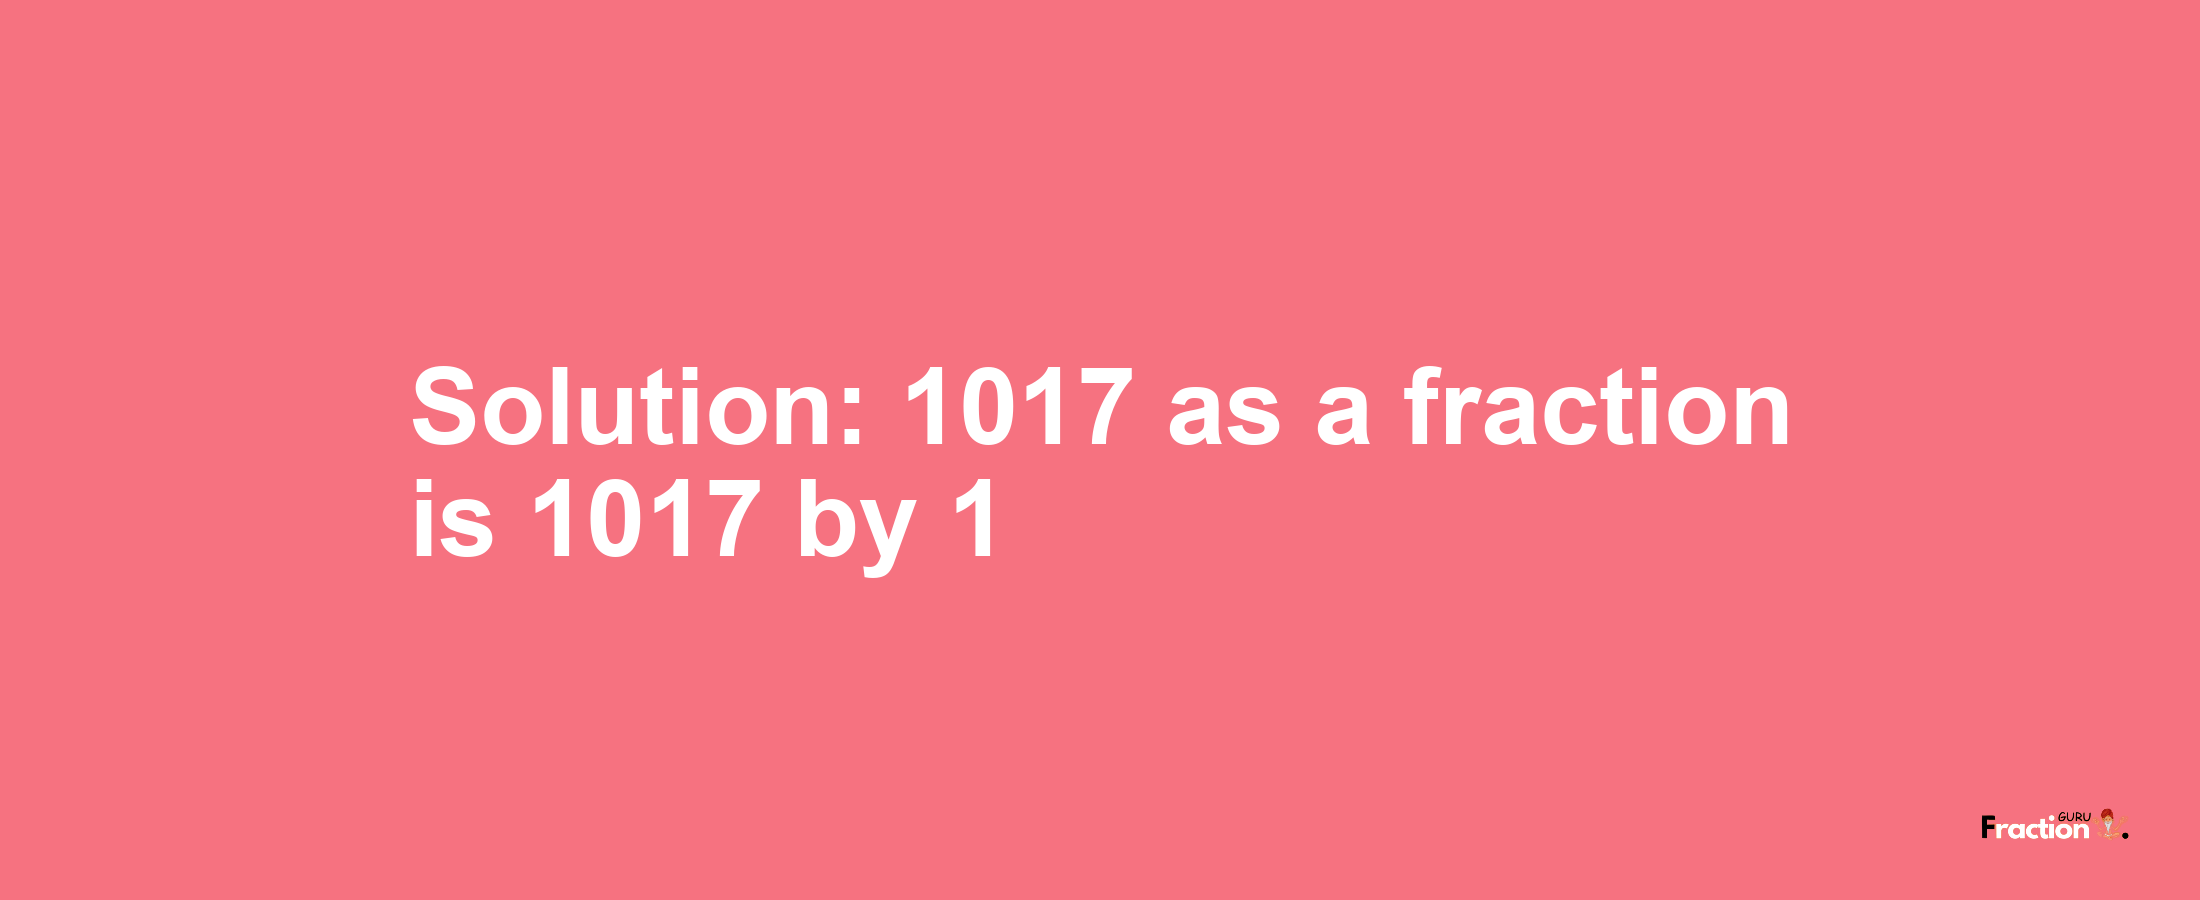 Solution:1017 as a fraction is 1017/1